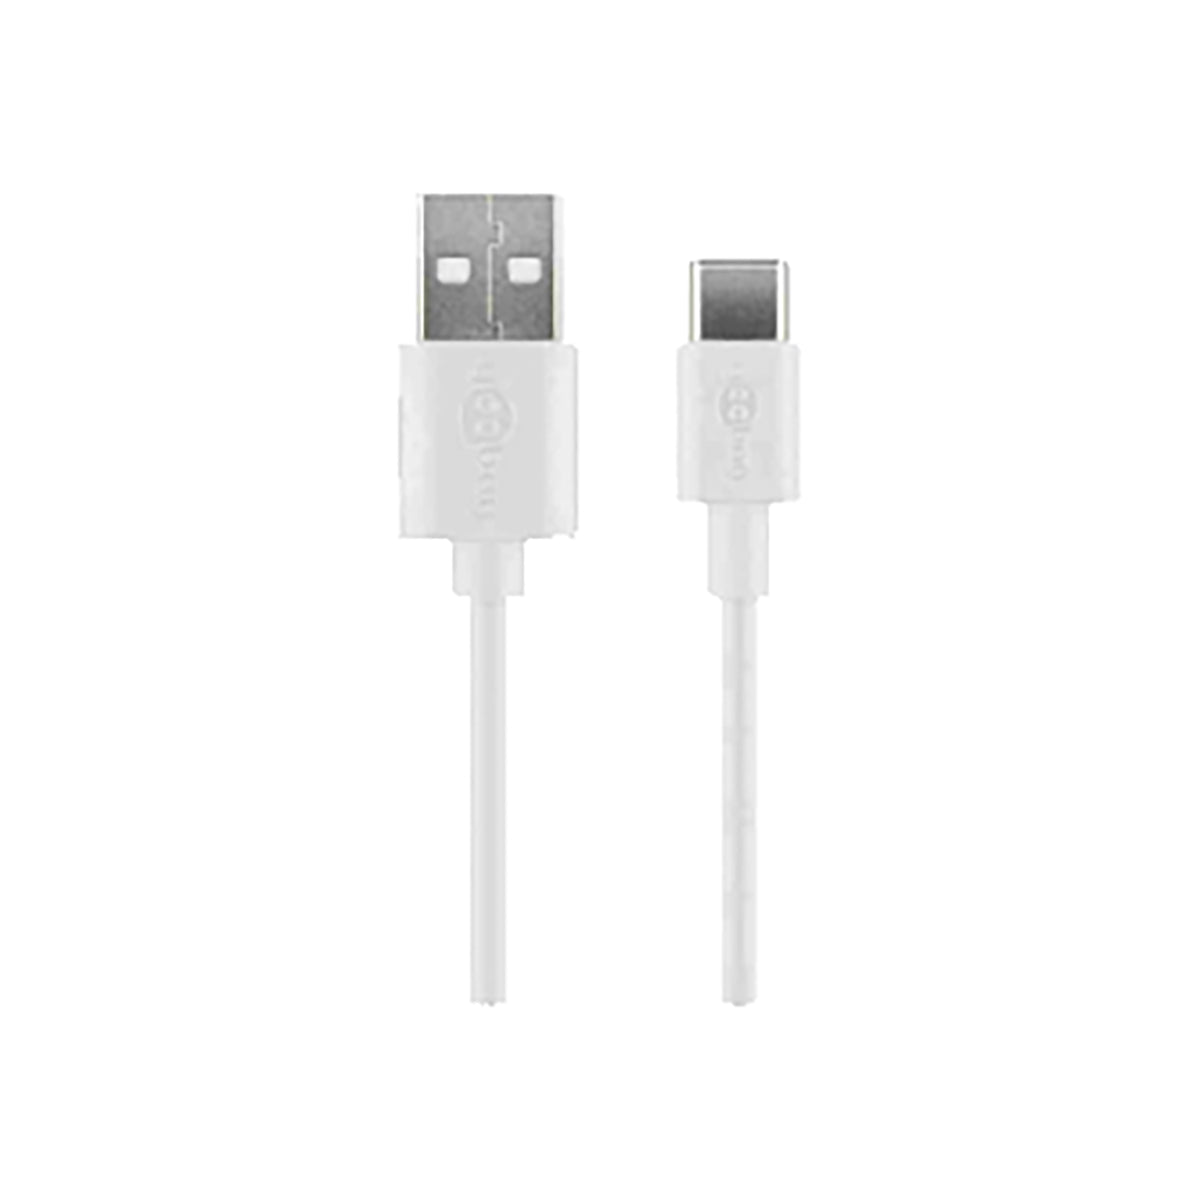 Goobay USB-A to USB-C Cable 1m for Smartphones/Tablets/Laptops - White